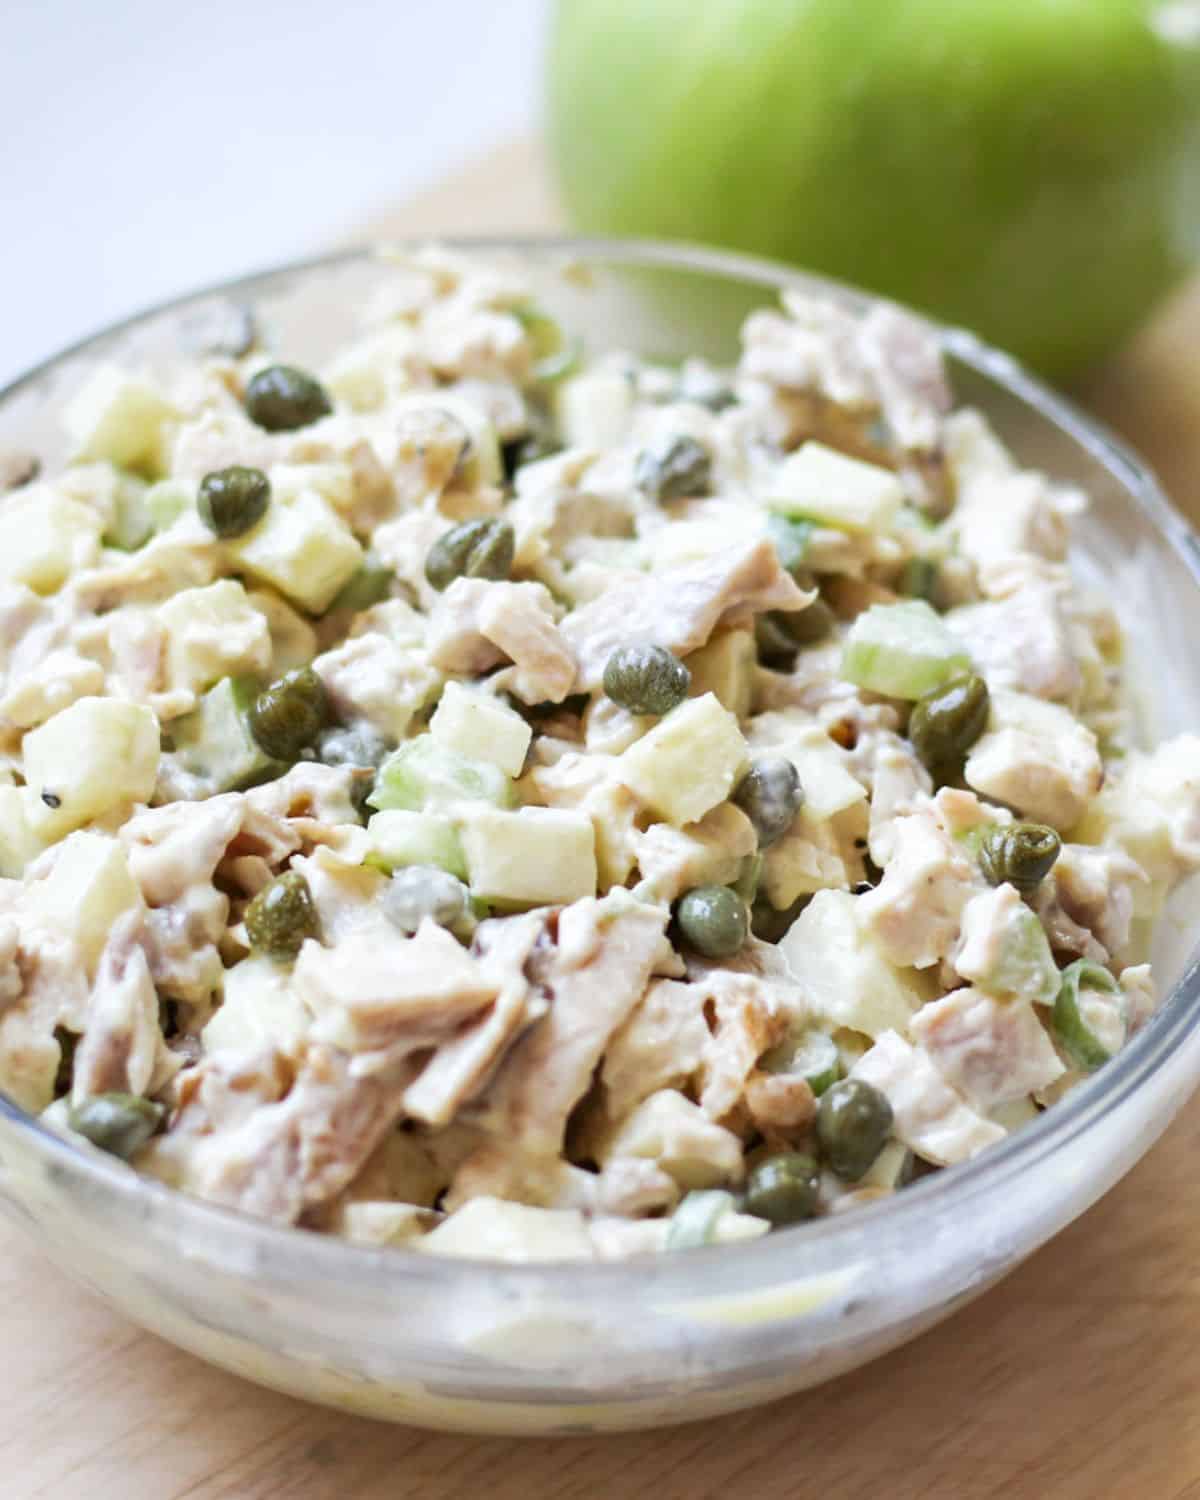 Creamy chicken salad with cubed apples and capers in a large glass bowl. There is a whole green apple behind the bowl.